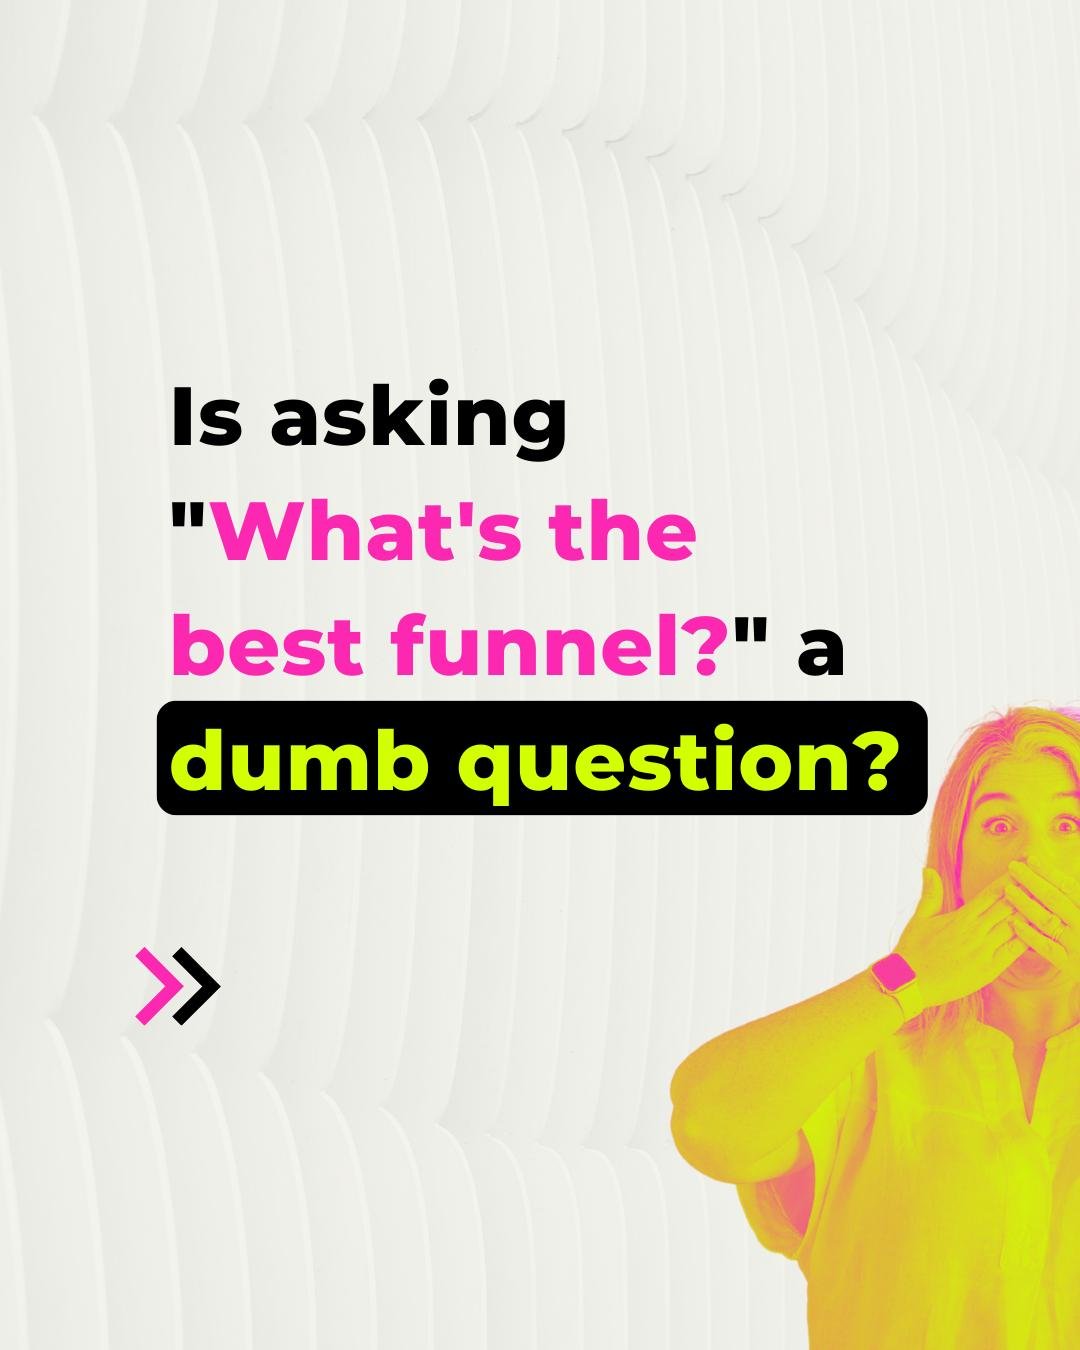 So, I was on a call yesterday and someone dropped the classic question: &quot;What's the best funnel?&quot; and let me tell you, it's a bit like asking for the meaning of life &ndash; ambitious, but maybe a tad naive

Because let's face it, if findin